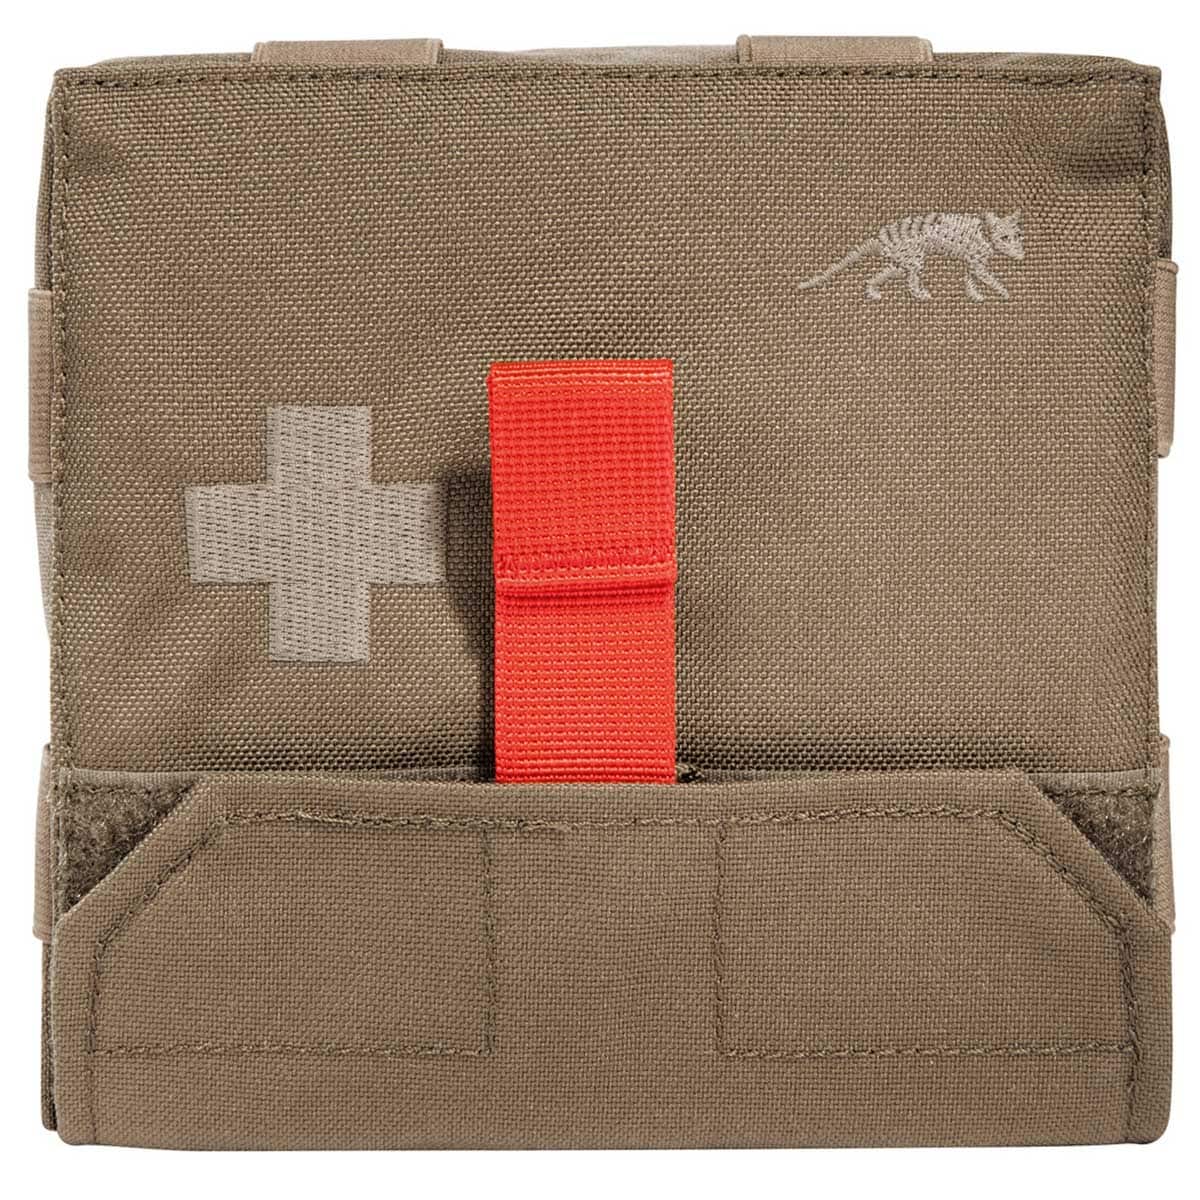 Аптечка Tasmanian Tiger IFAK Pouch S MKII First Aid Pouch - Coyote Brown